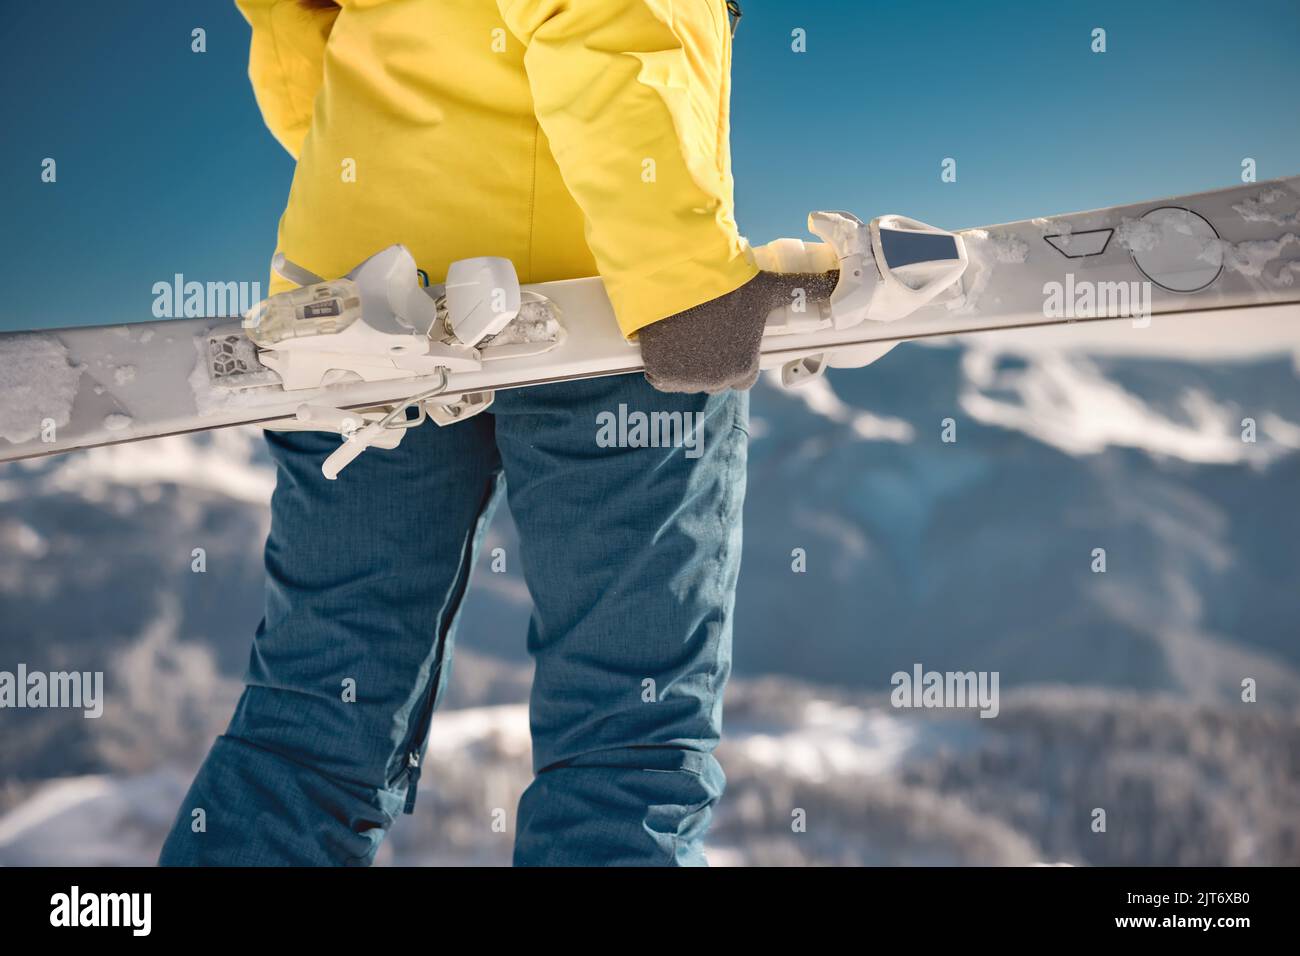 Close up photo of female skier with ski in hands. Winter sports concept Stock Photo